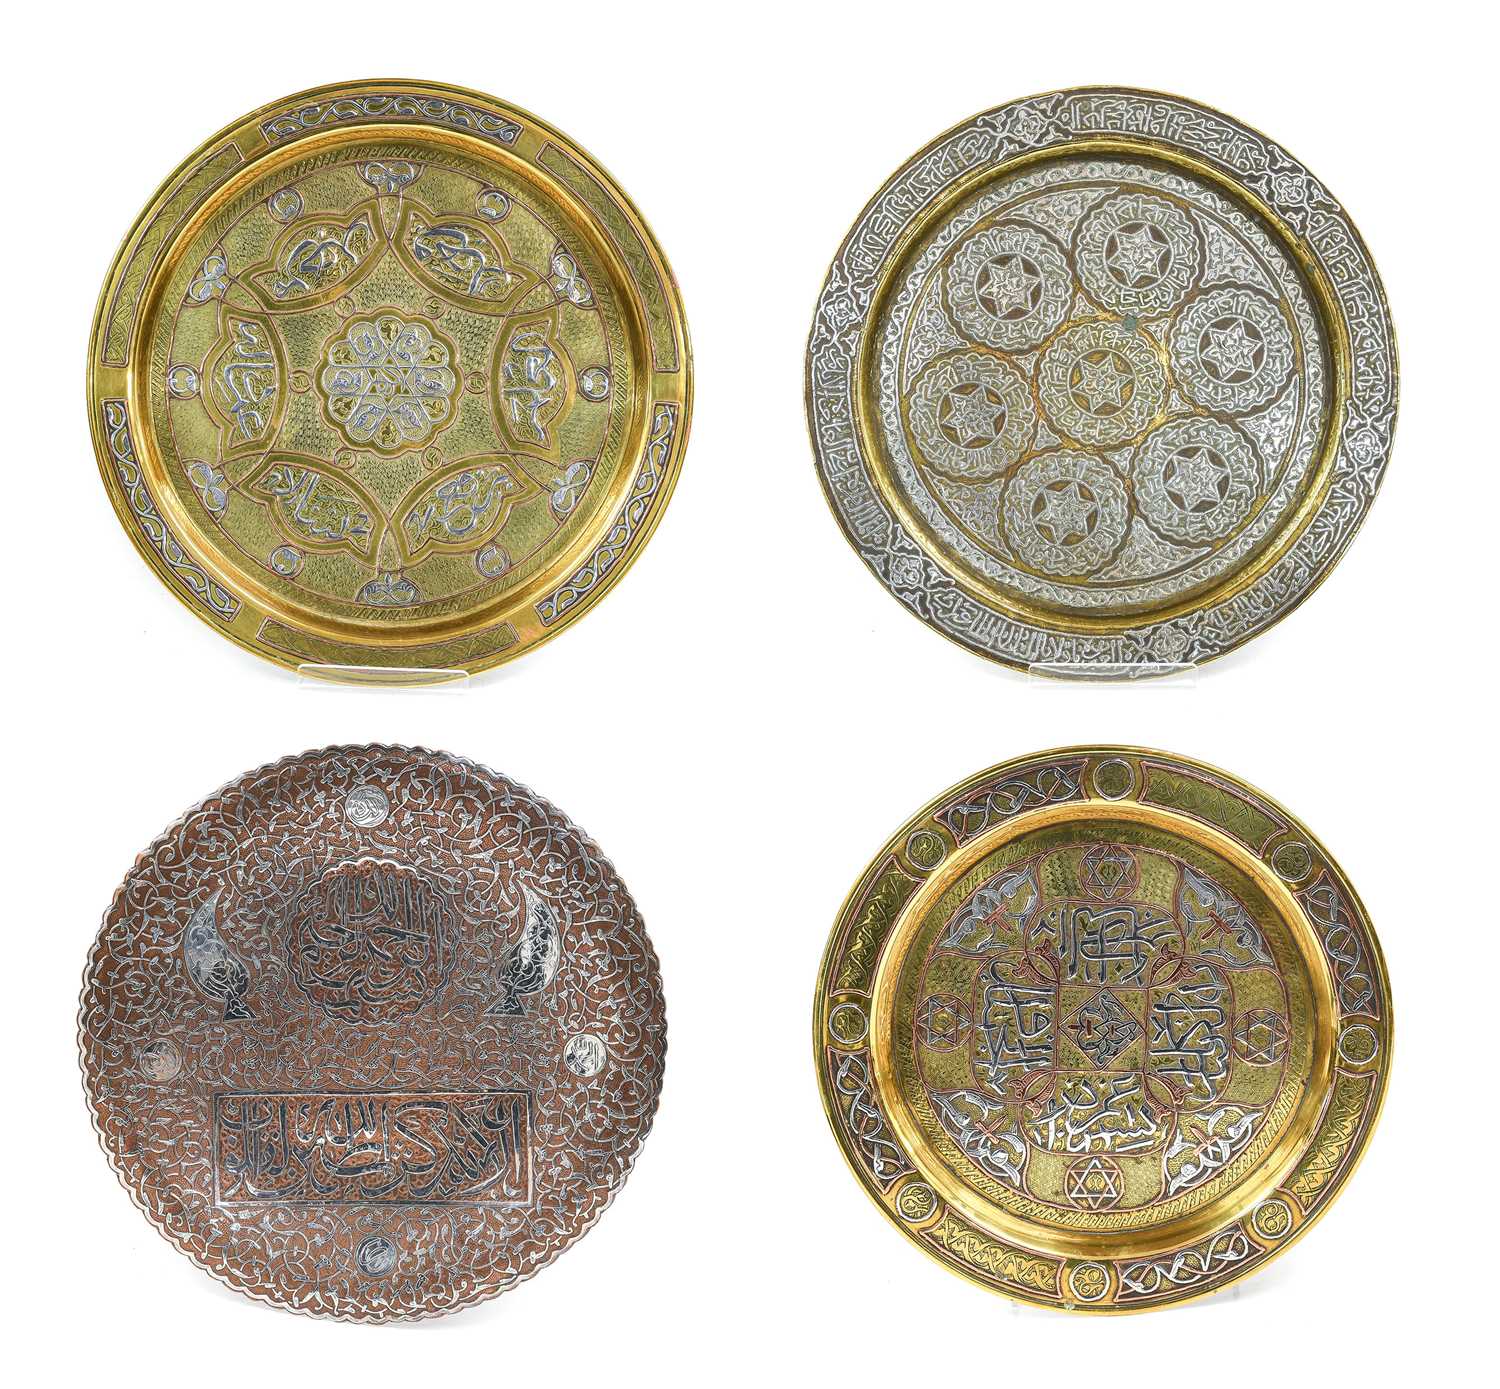 A Cairoware Circular Tray, late 19th/20th century, inlaid in copper and silver with a central